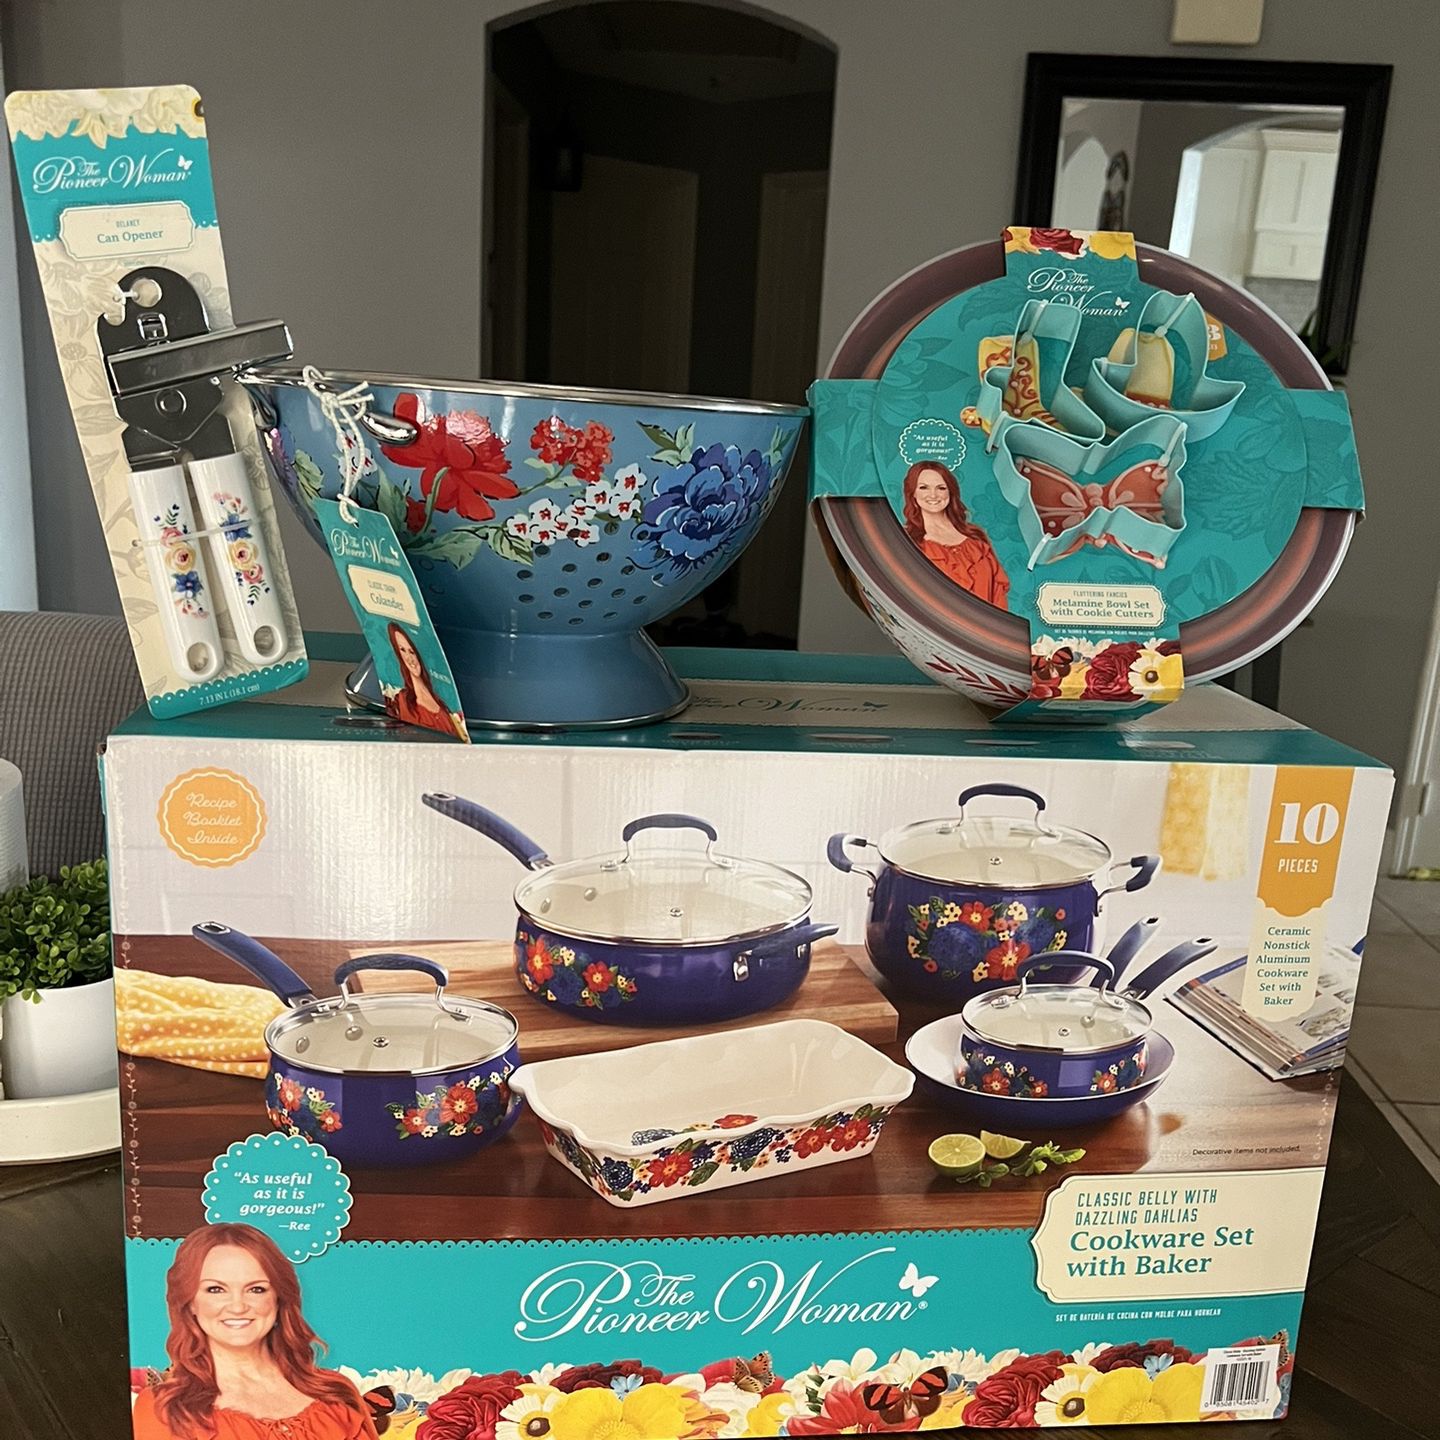 Wolfgang Puck Cookware Set All New for Sale in Pembroke Pines, FL - OfferUp